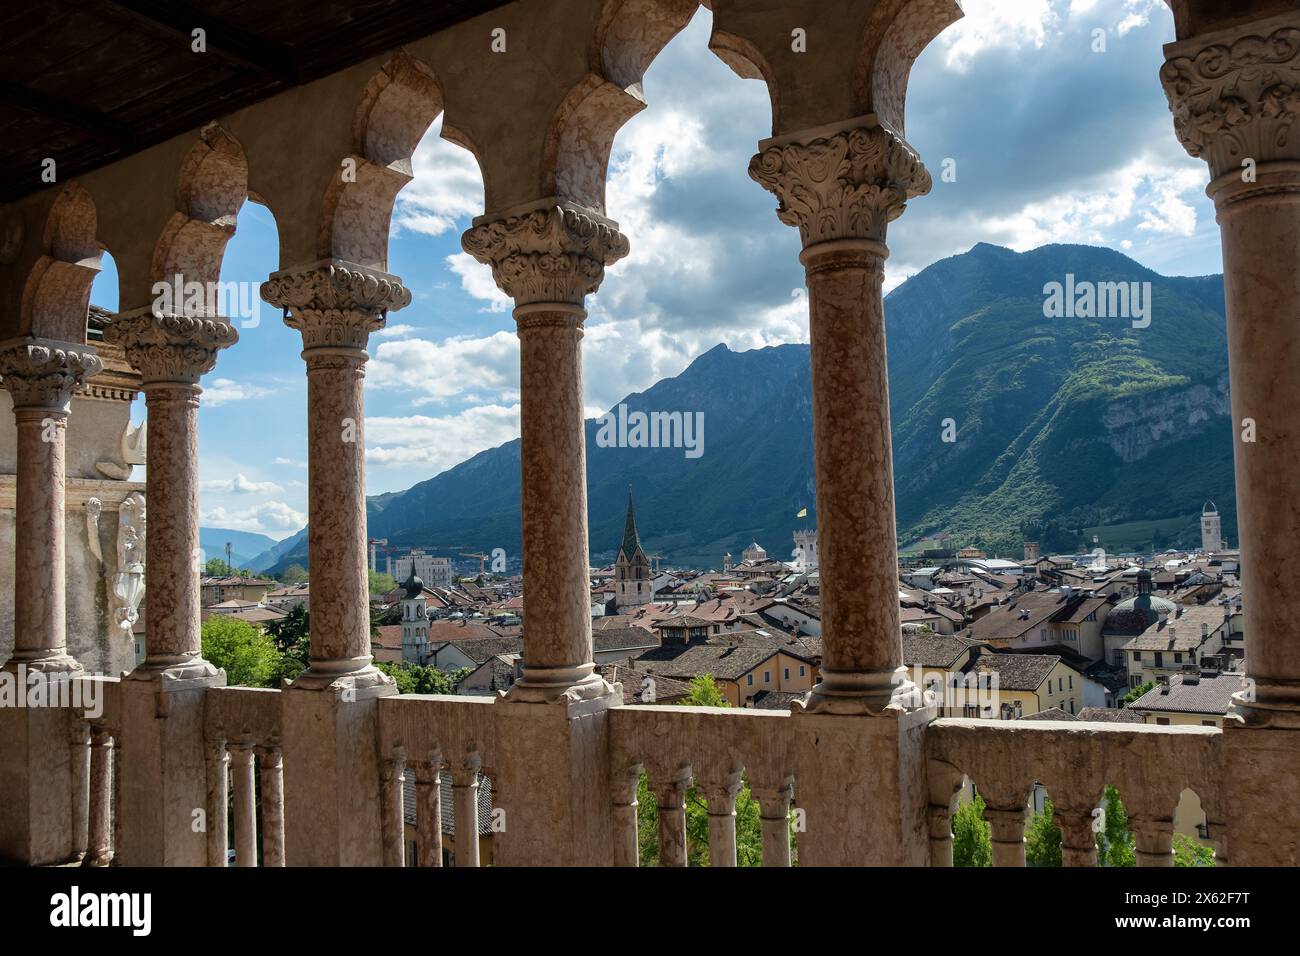 Panoramic cityscape image of Trento seen from a facade of a medieval palace - Trento, Trentino Alto Adige, Sudtirol region in Italy. Stock Photo